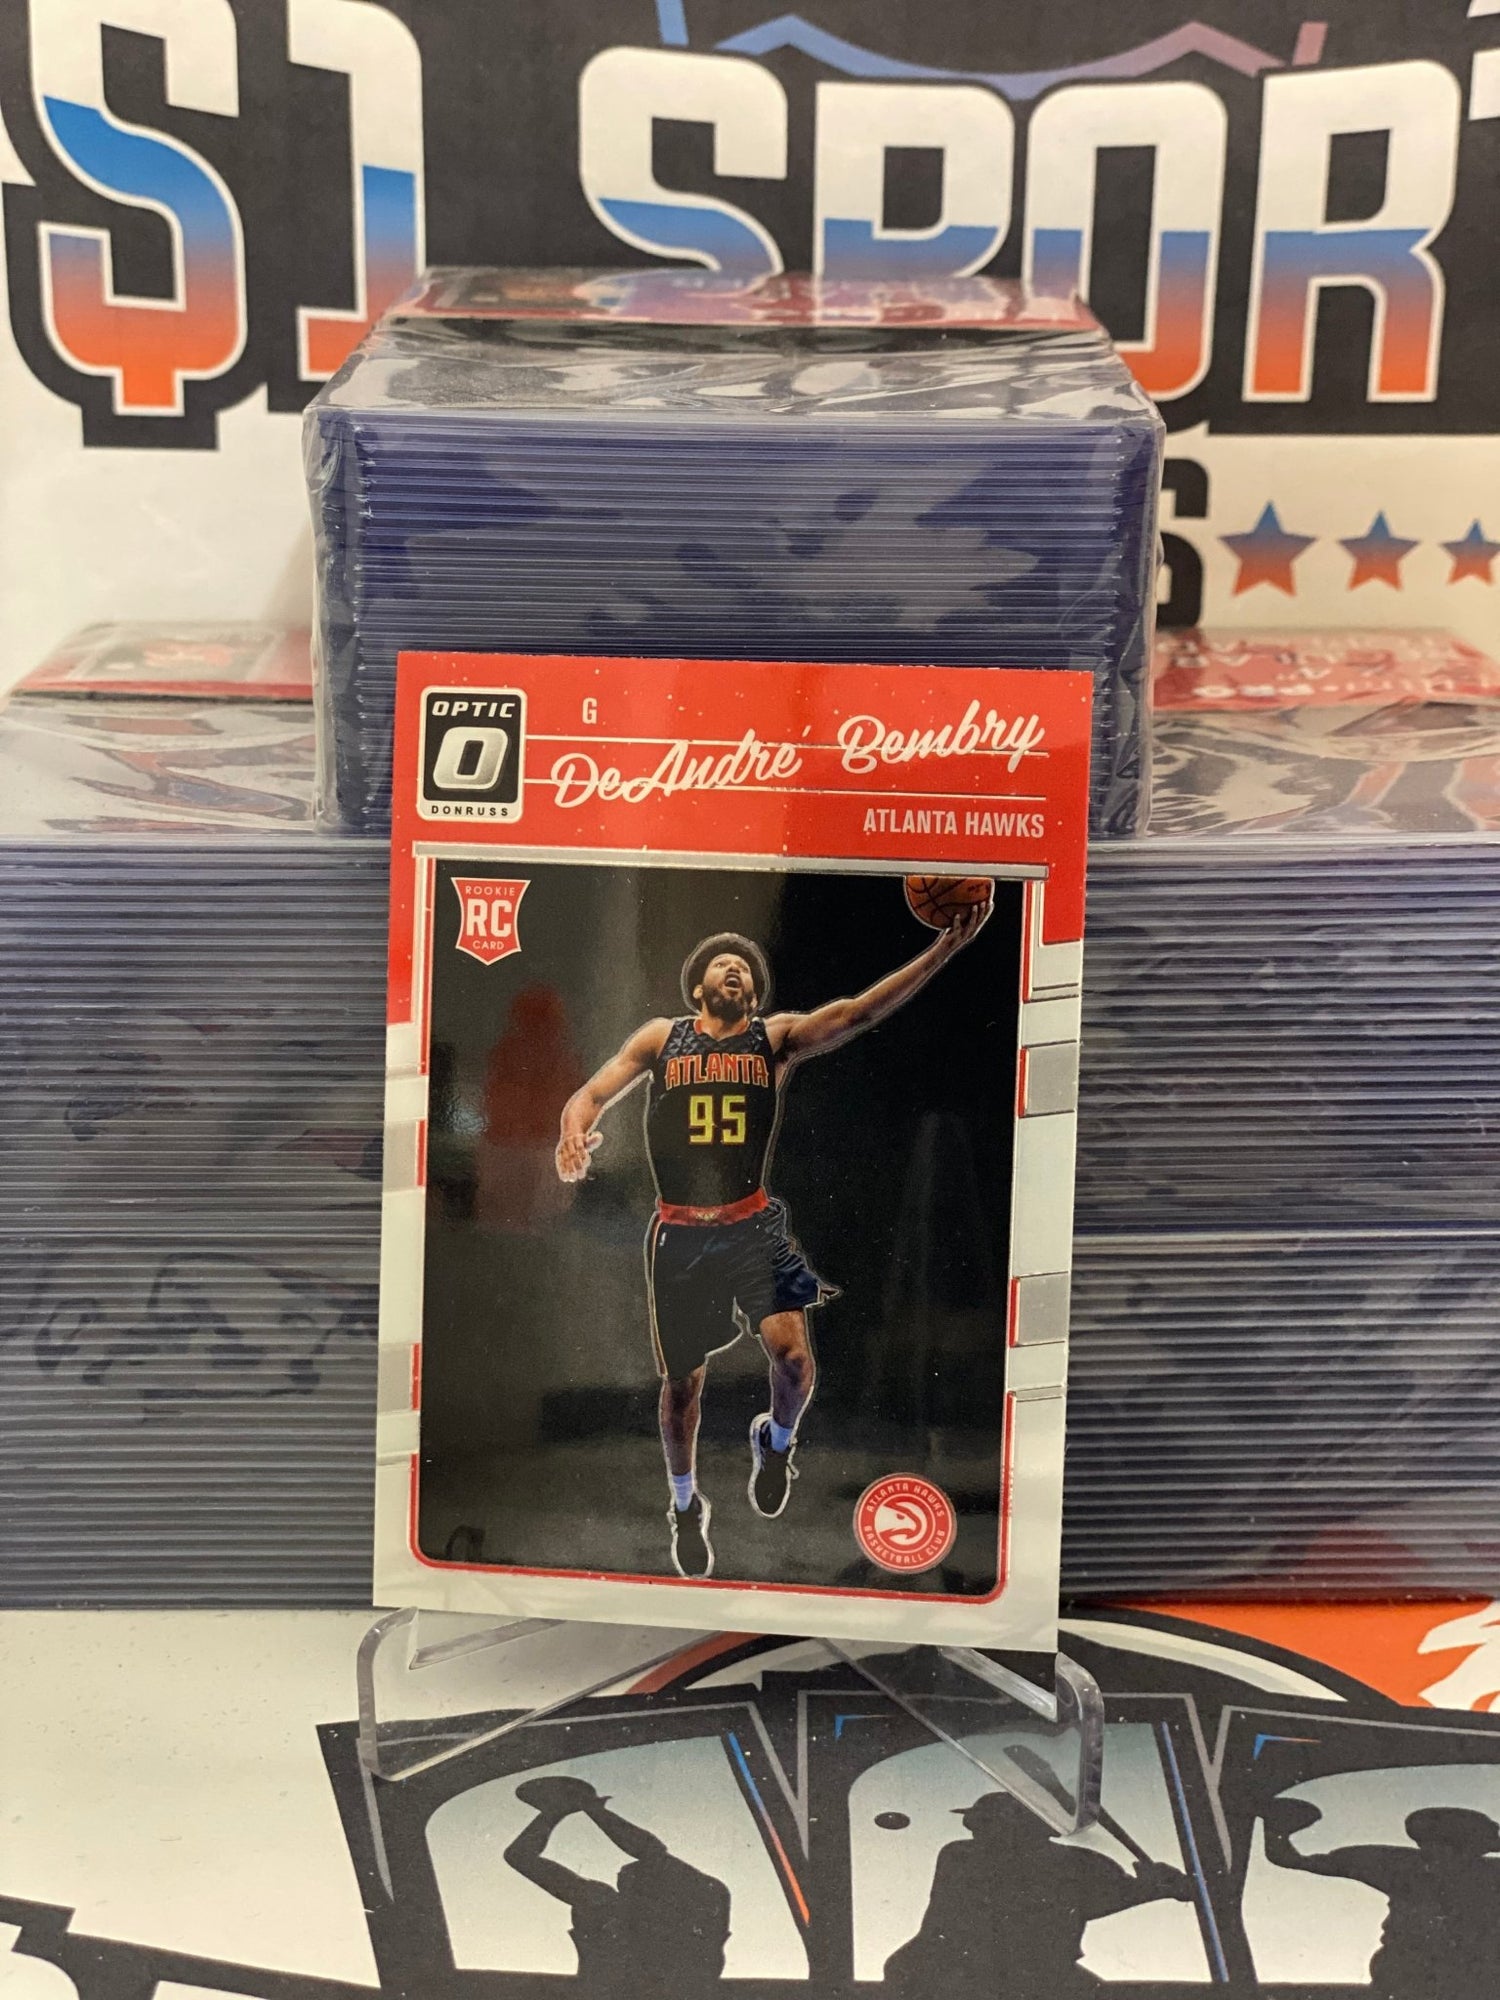 2016 Donruss Optic (Rated Rookie) DeAndre' Bembry #168